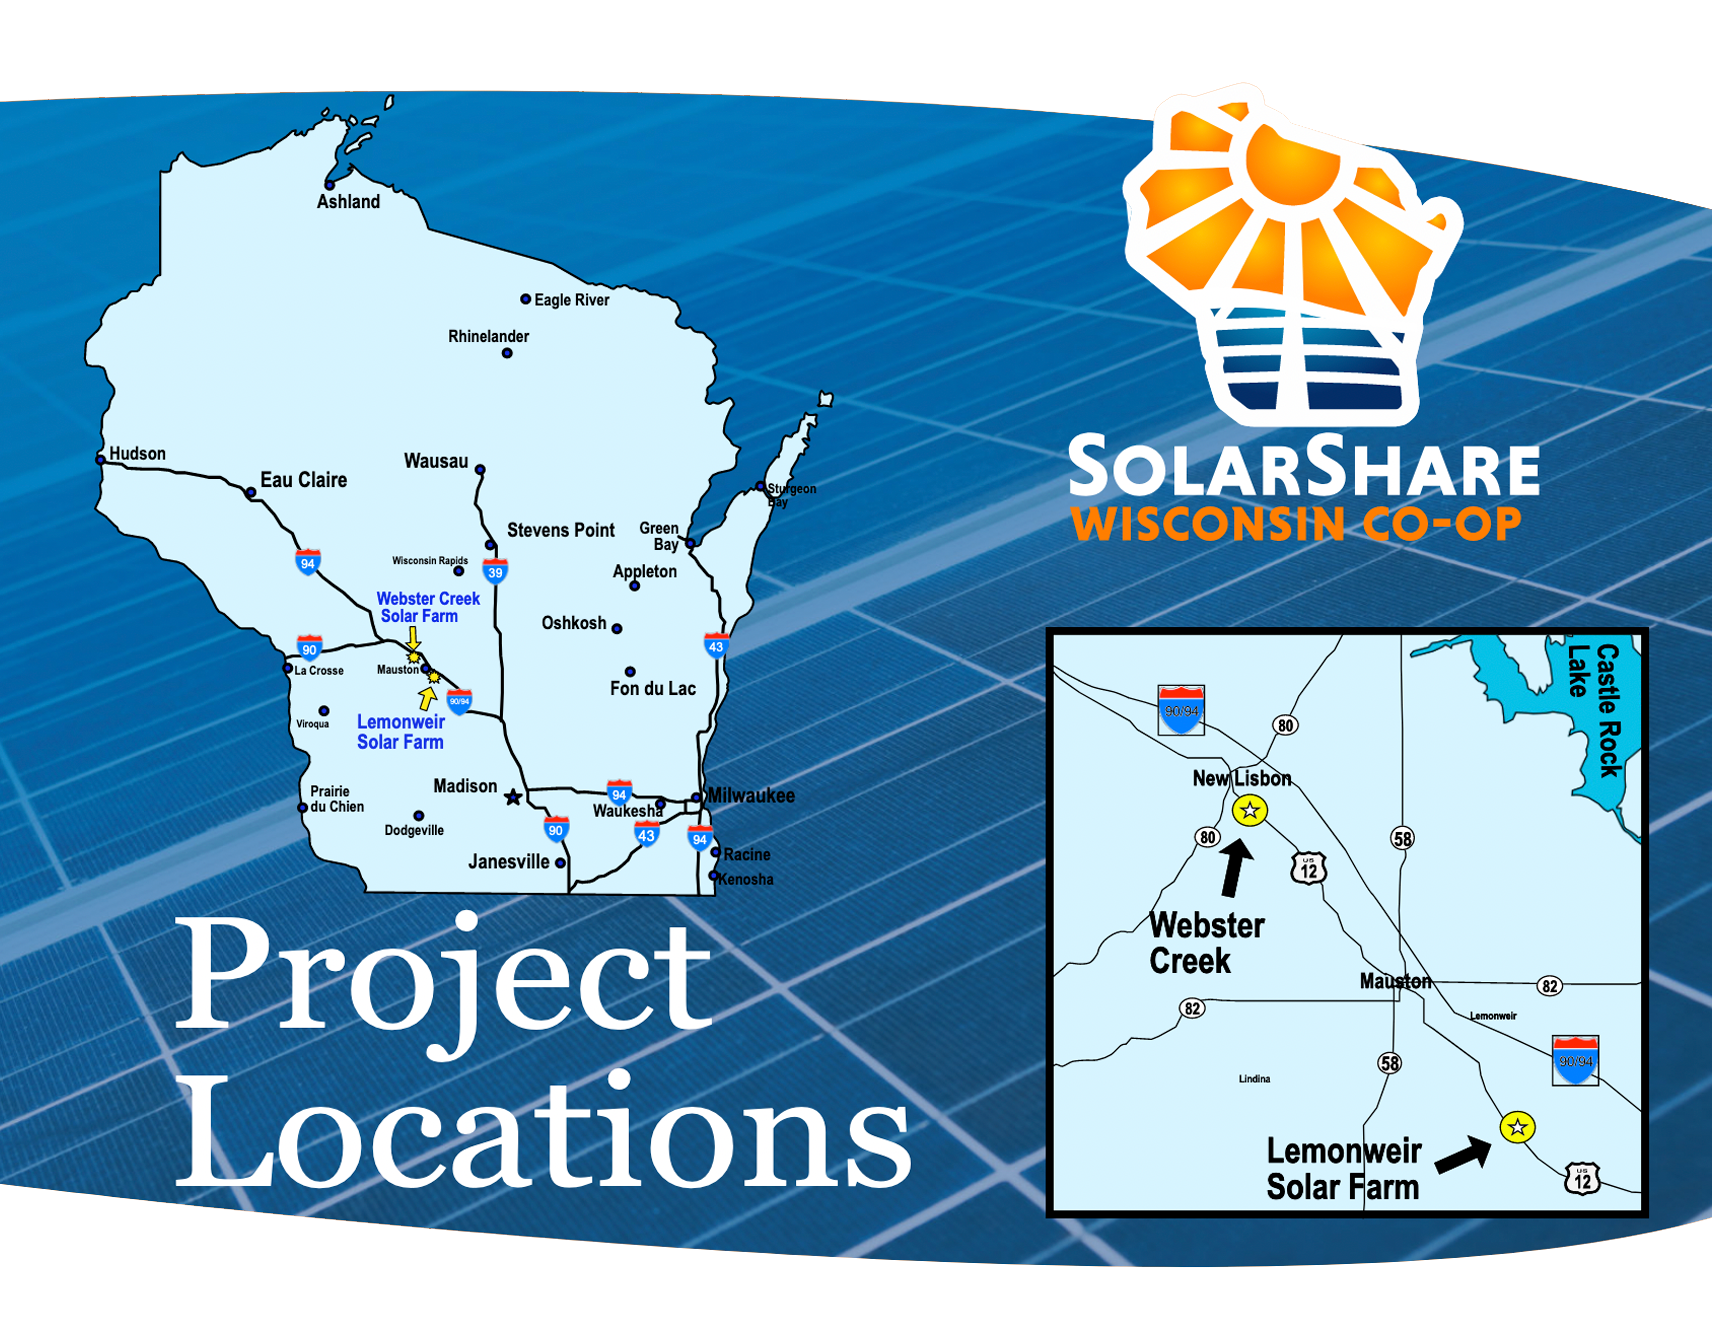 Map of Wisconsin showing SolarShare Project Locations